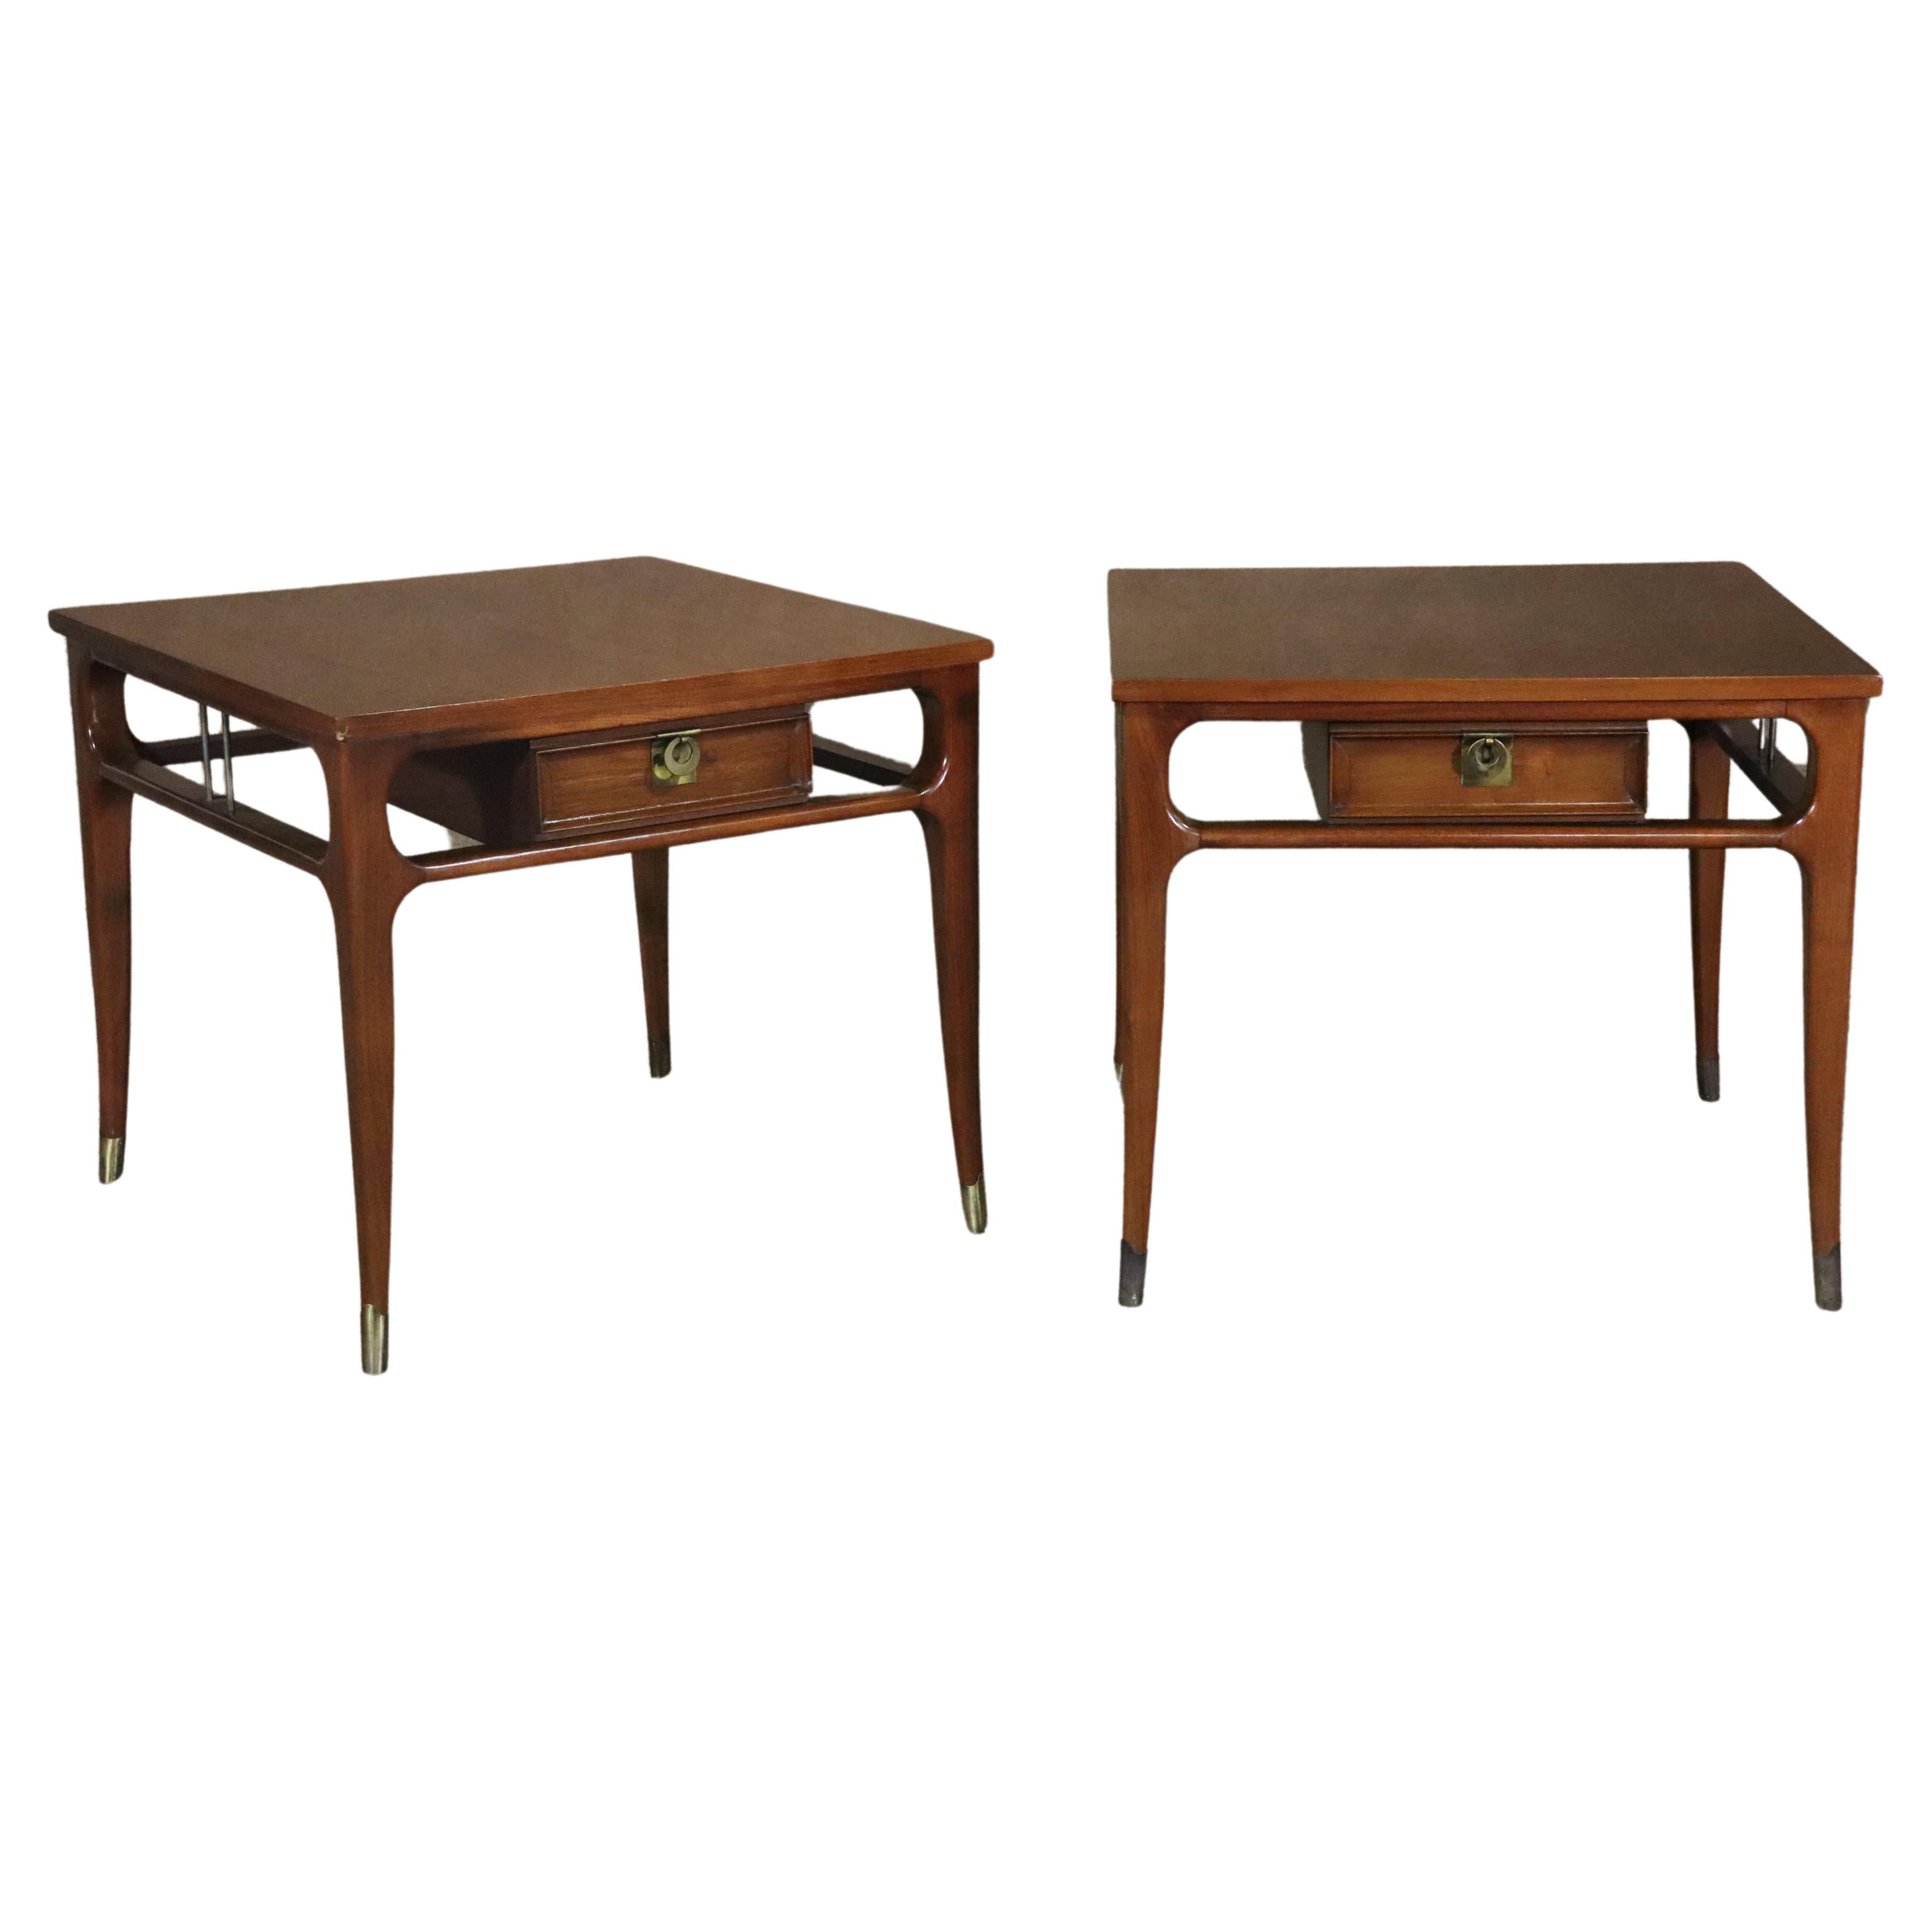 'Tiara' Series Tables by White Furniture For Sale